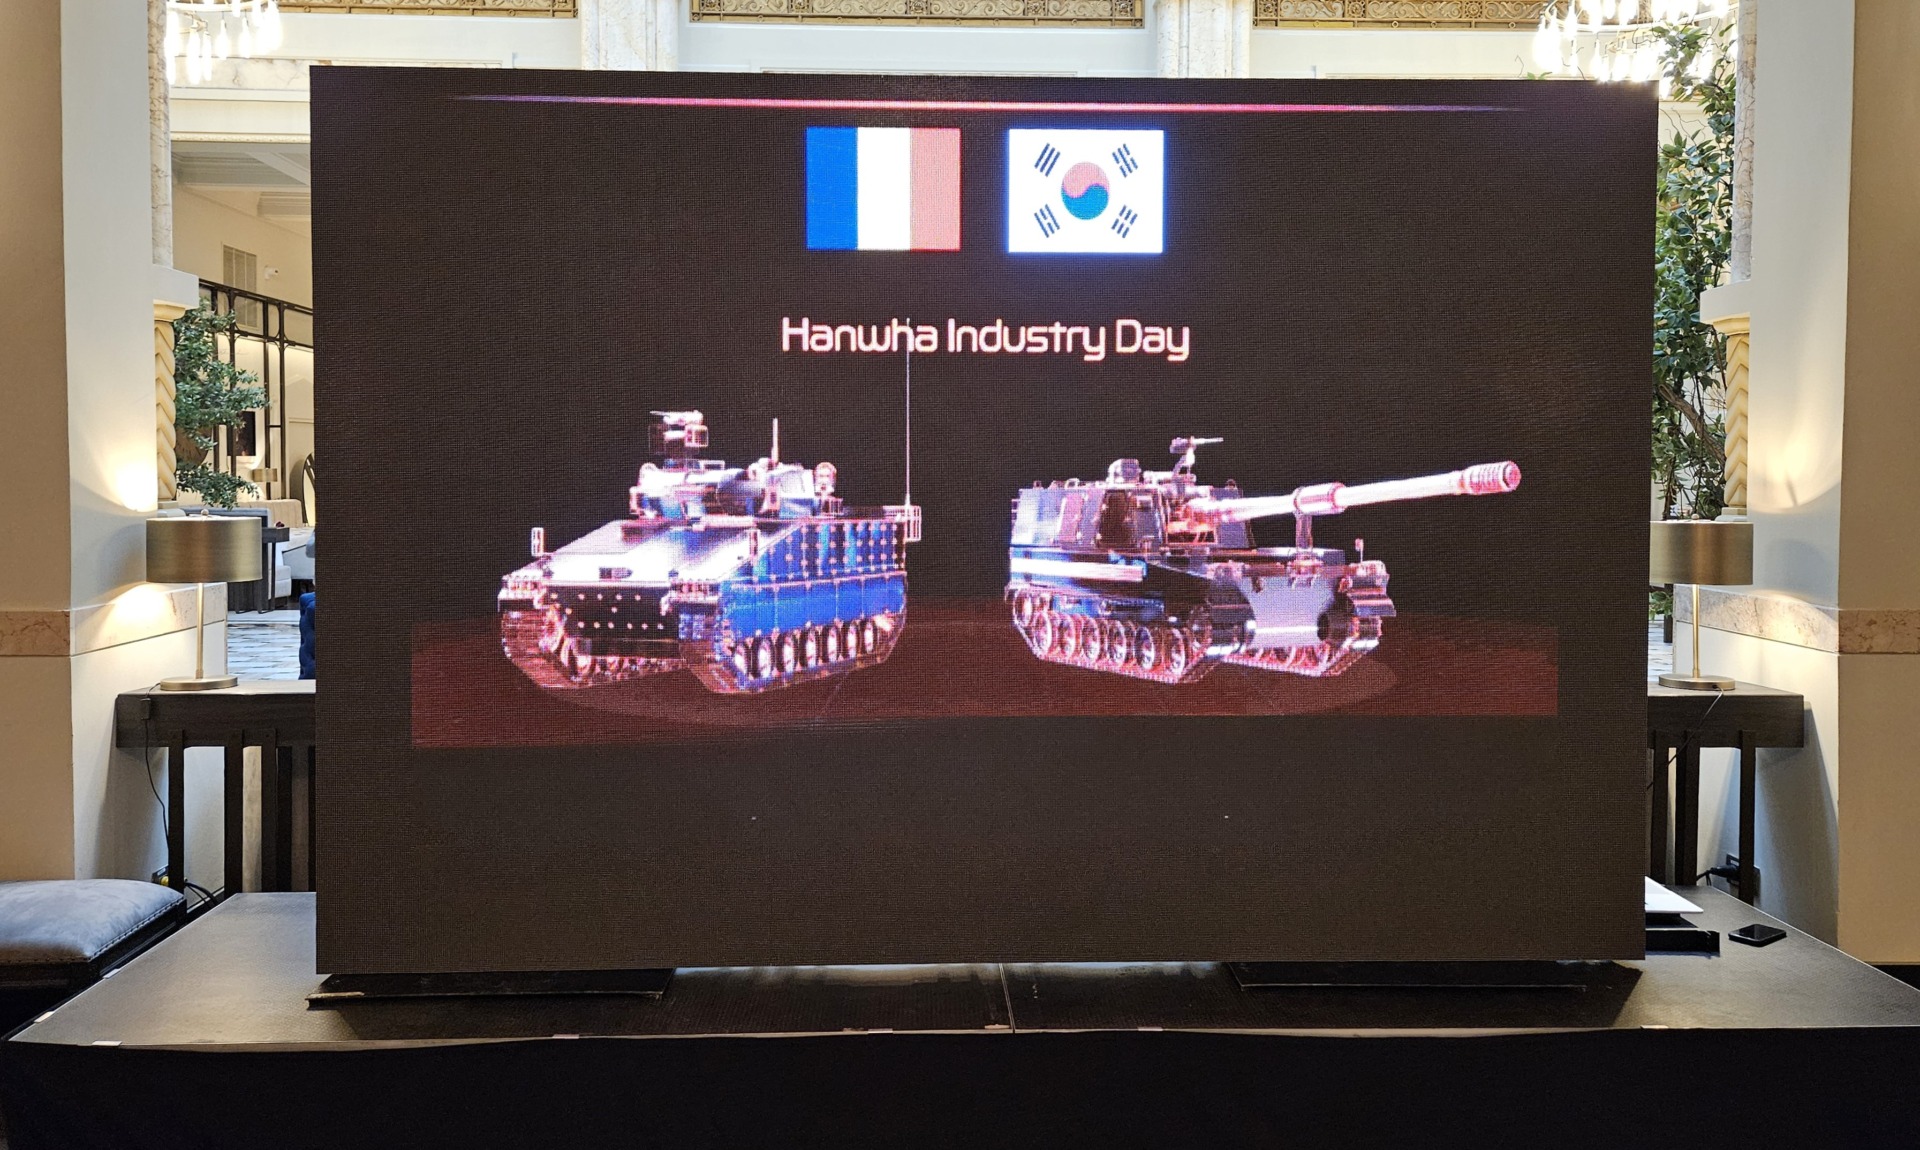 Hanwha Aerospace Holds Industry Day in Romania